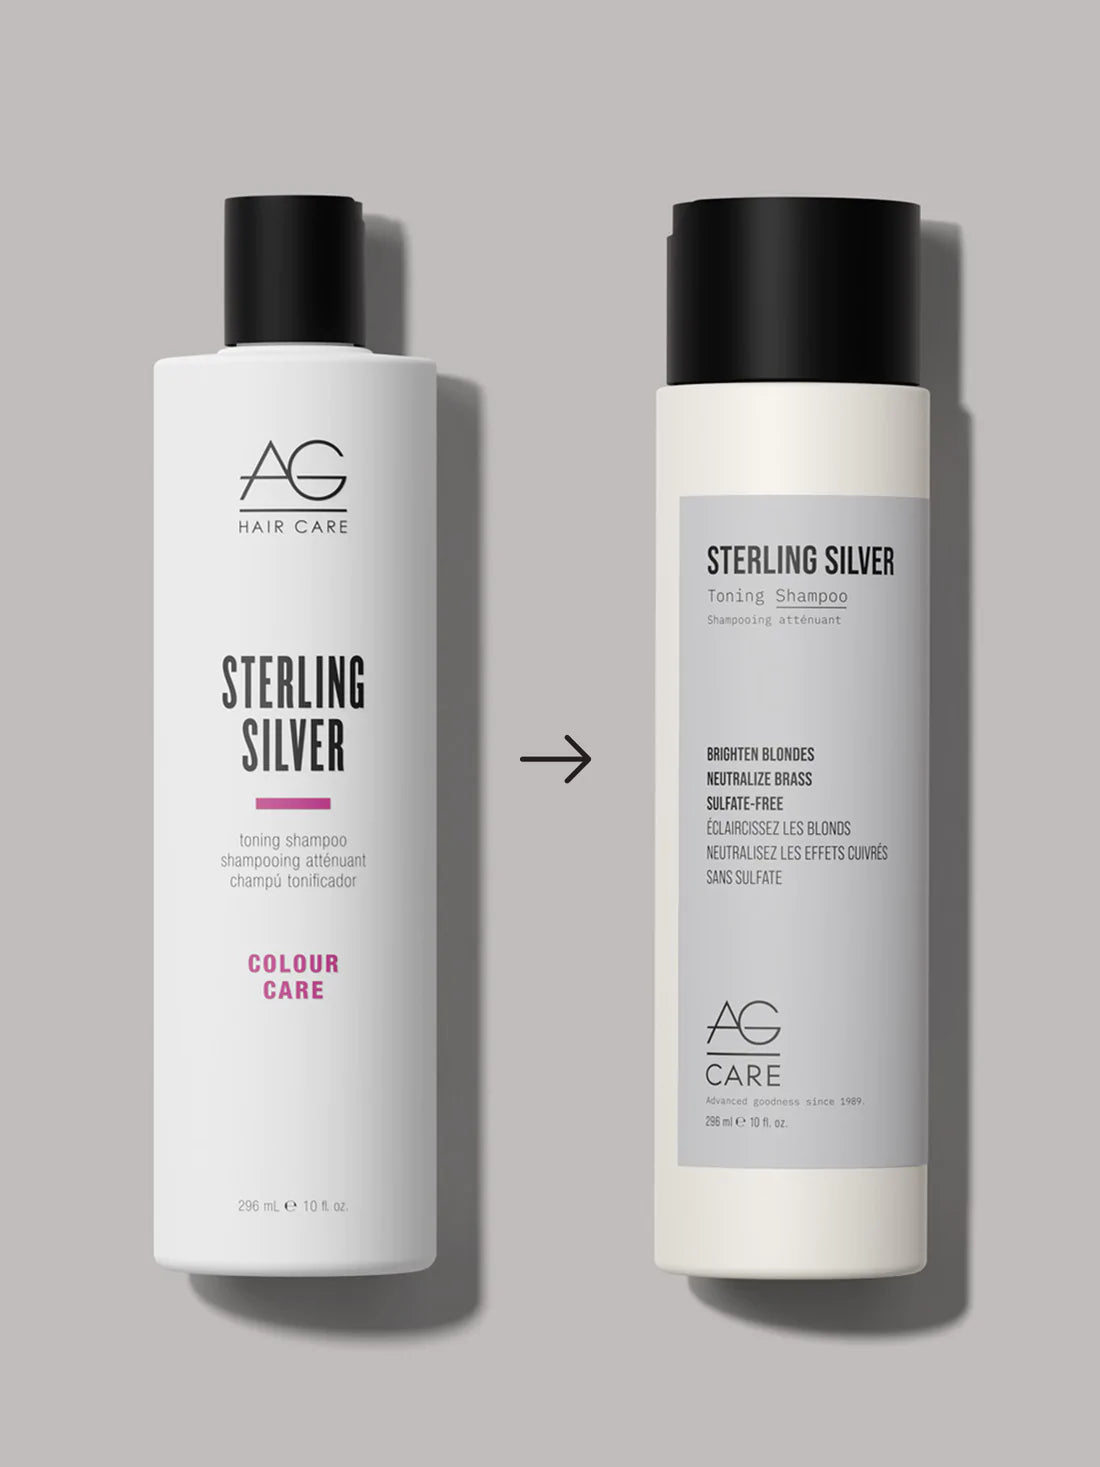 AG Care Sterling Silver Toning Shampoo 296 ml